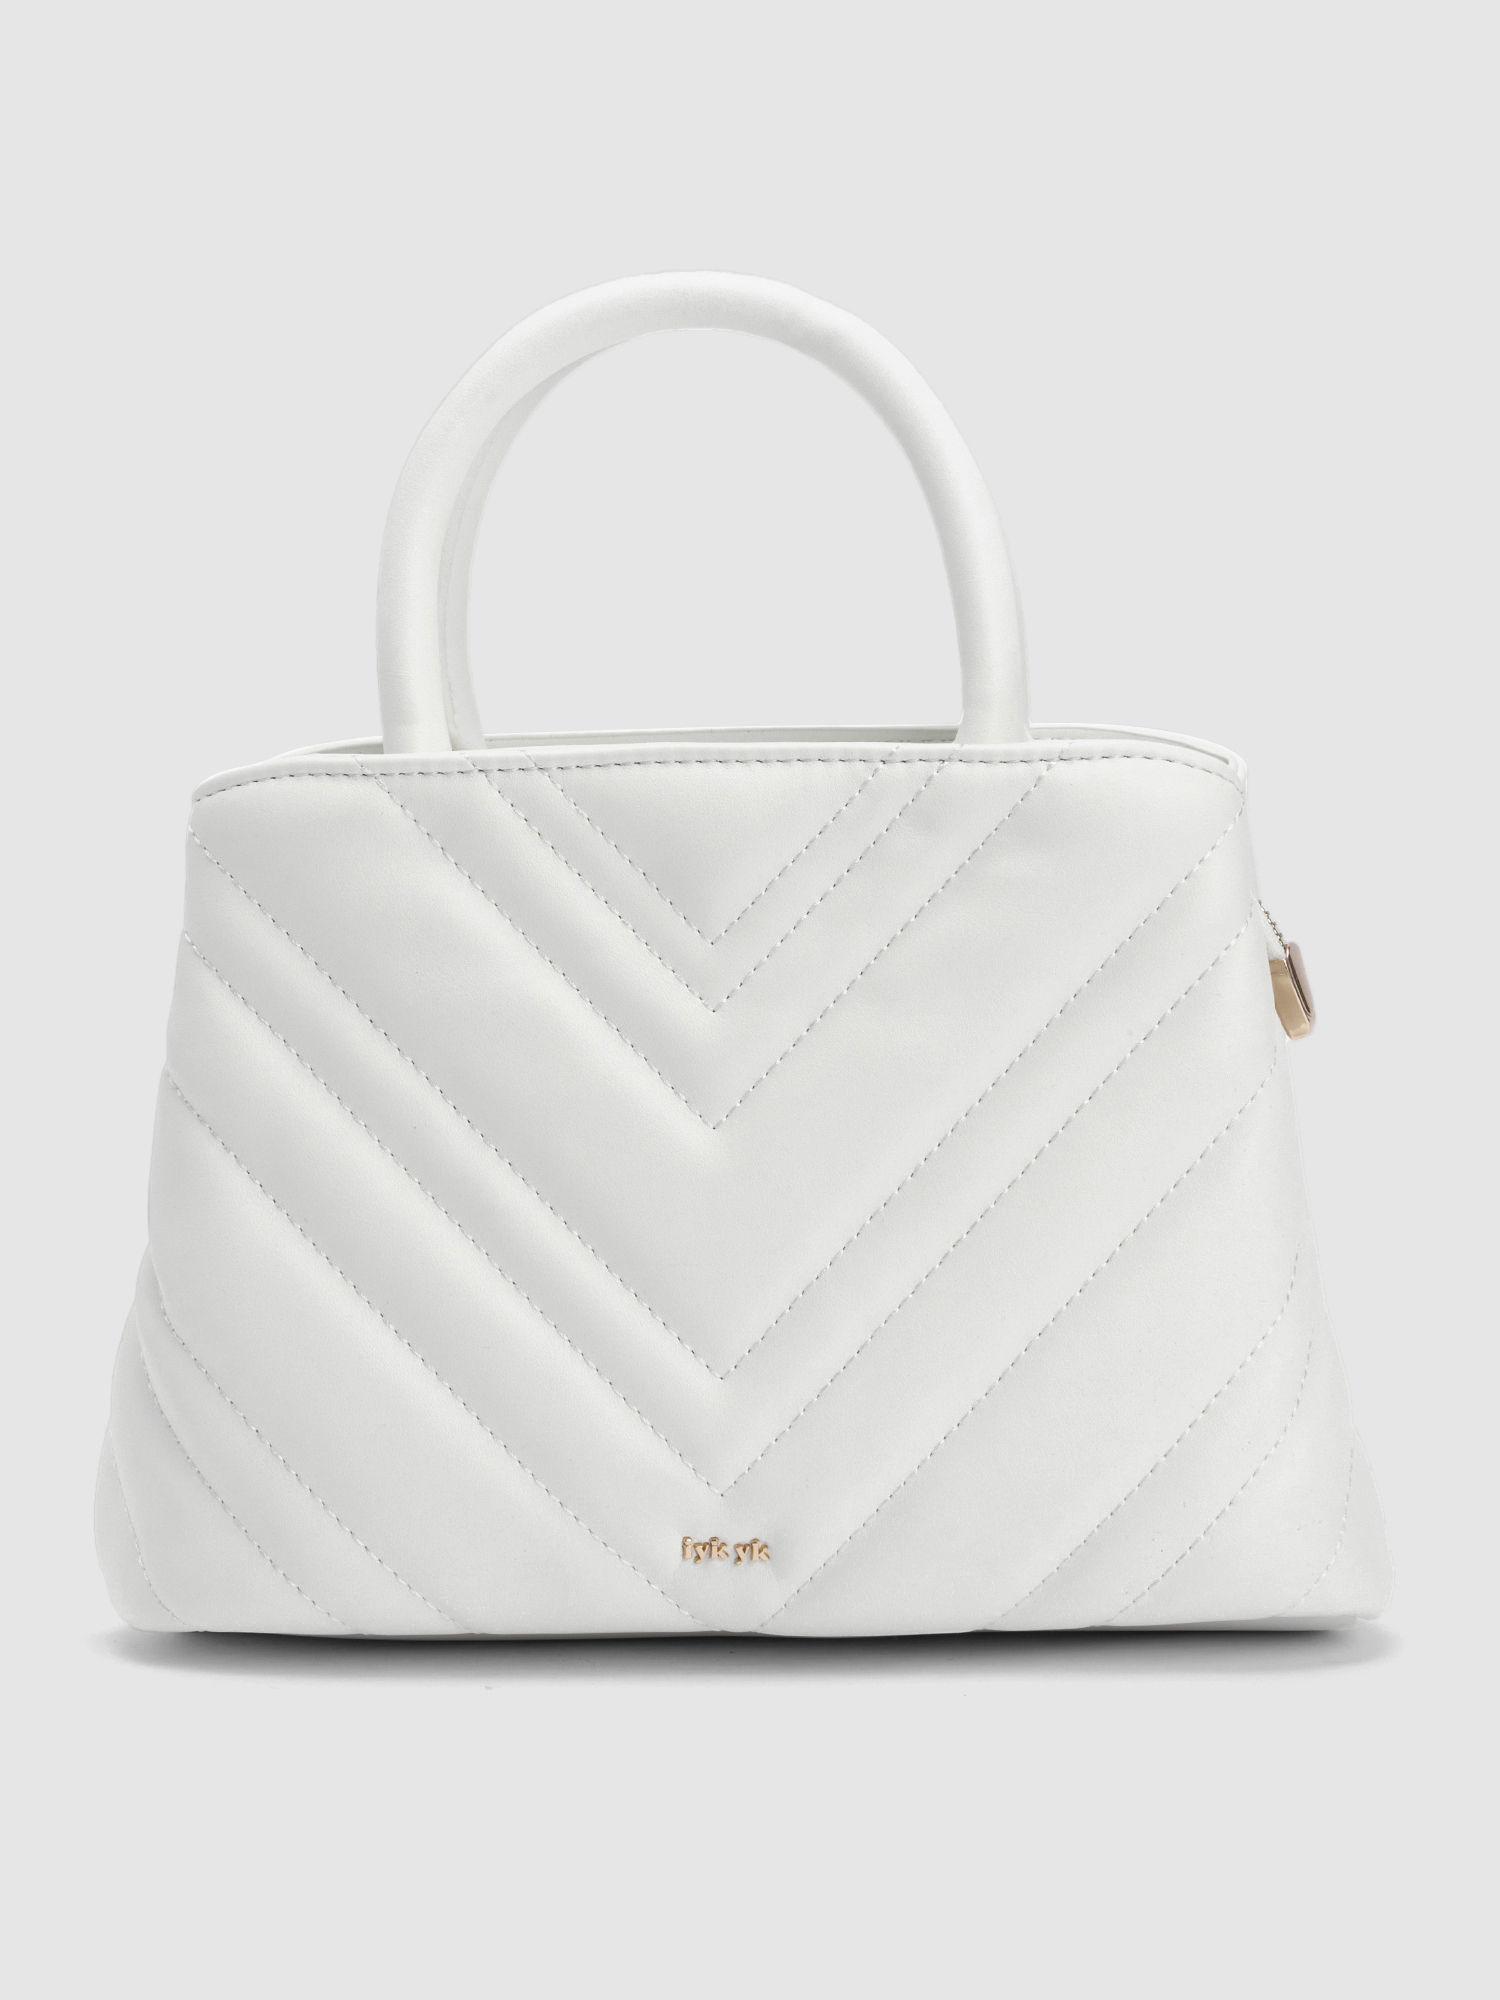 out of office white patterned handbag